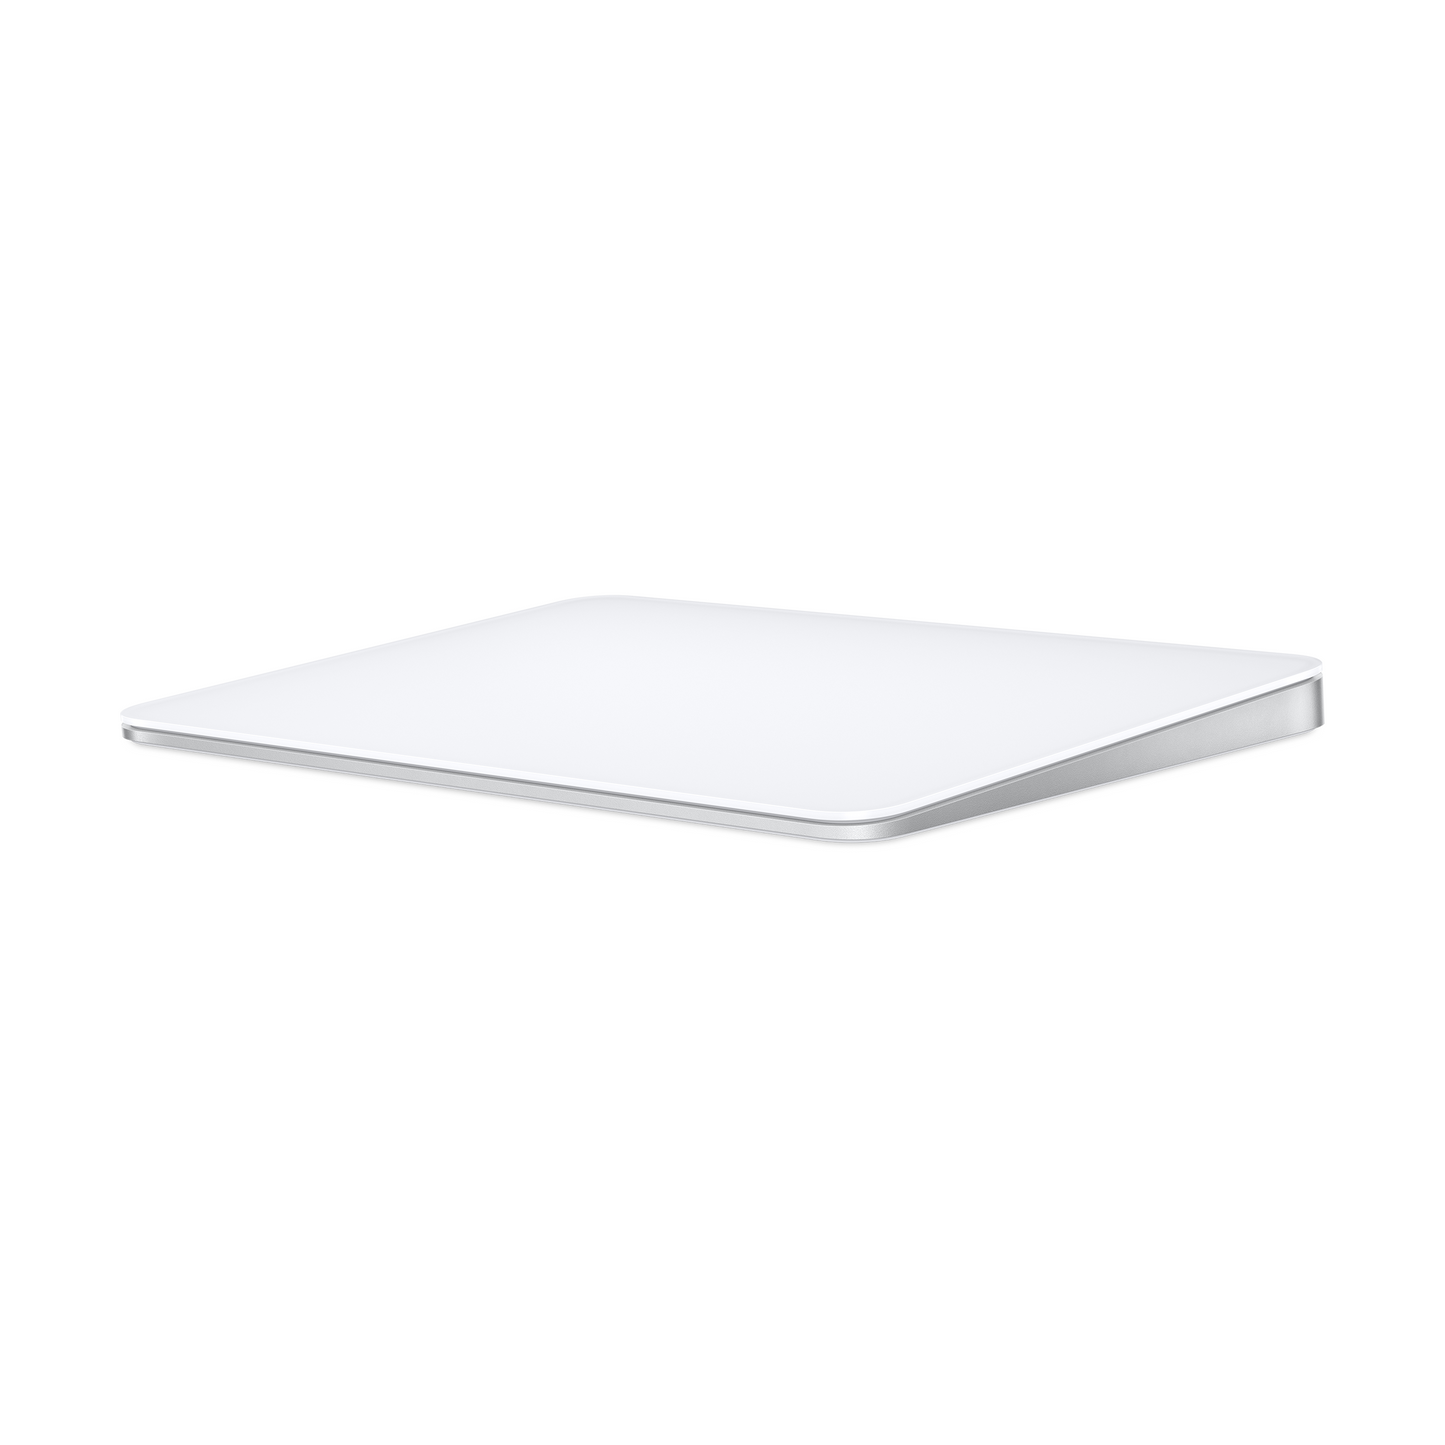 Apple Magic Trackpad (2021) w/ USB-C to Lightning Cable Included